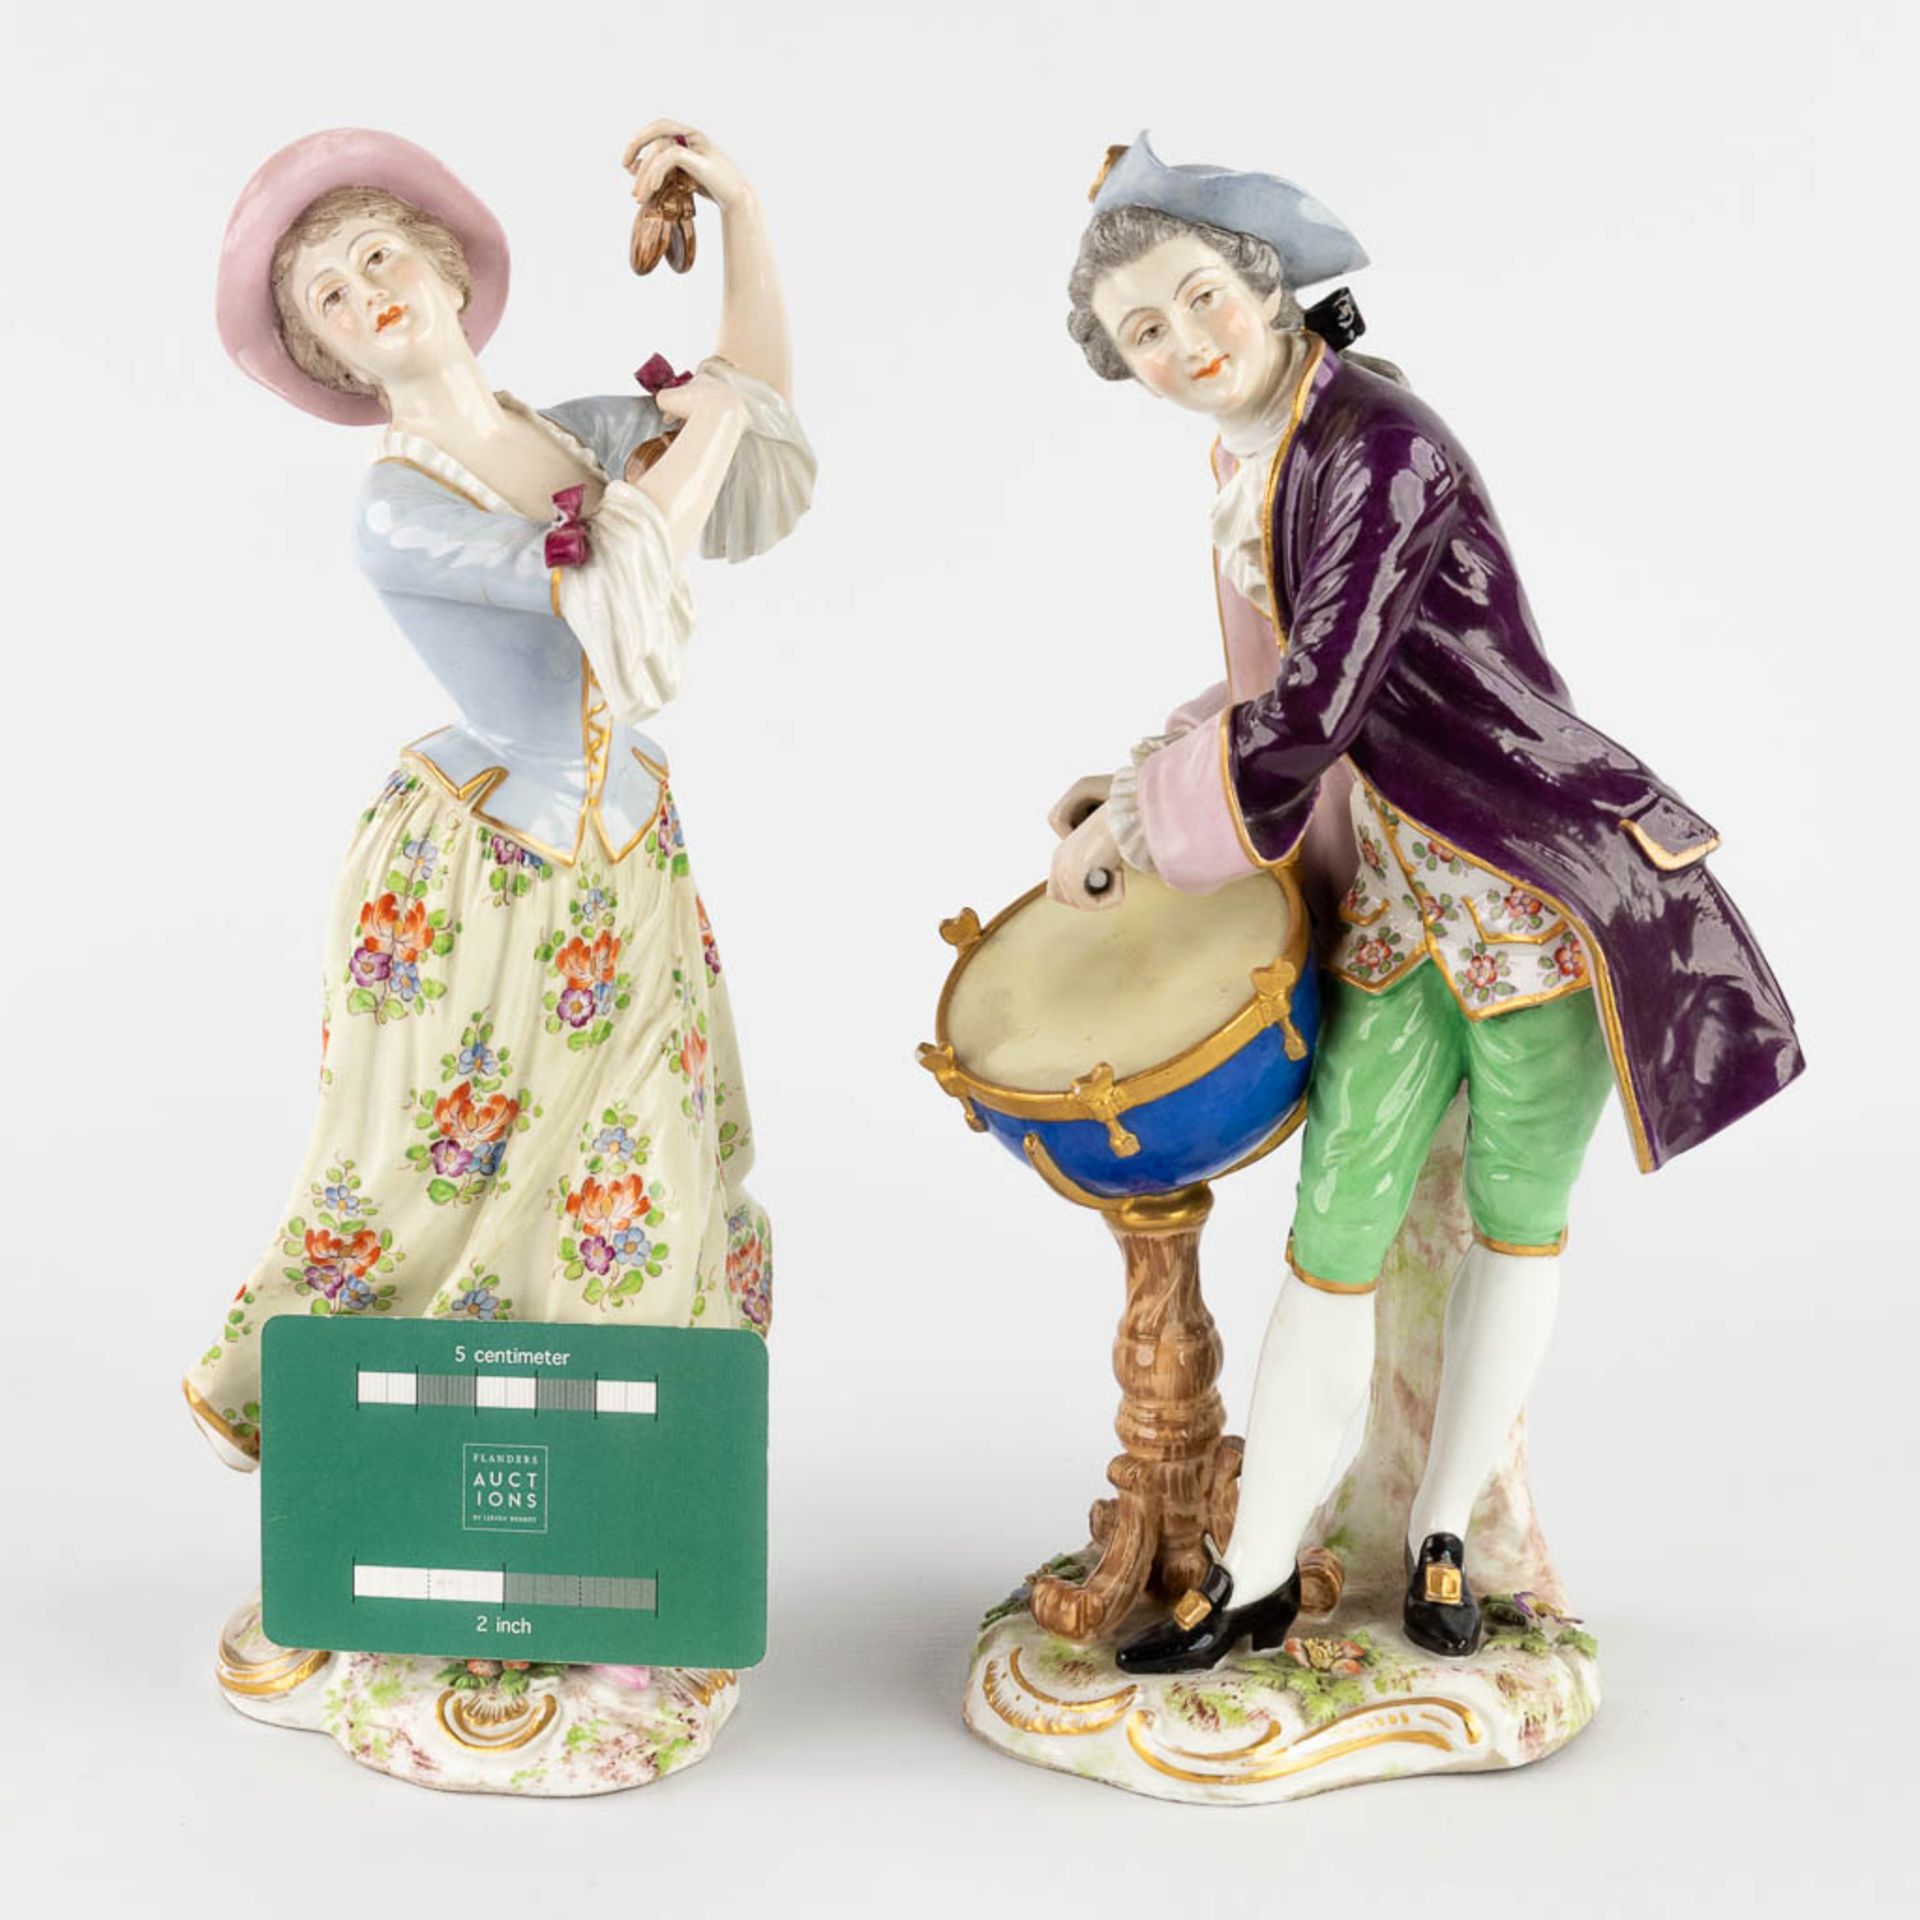 Meissen Porcelain mark, a dancing and musical couple. 19th C. (L:10 x W:14 x H:26 cm) - Image 17 of 20